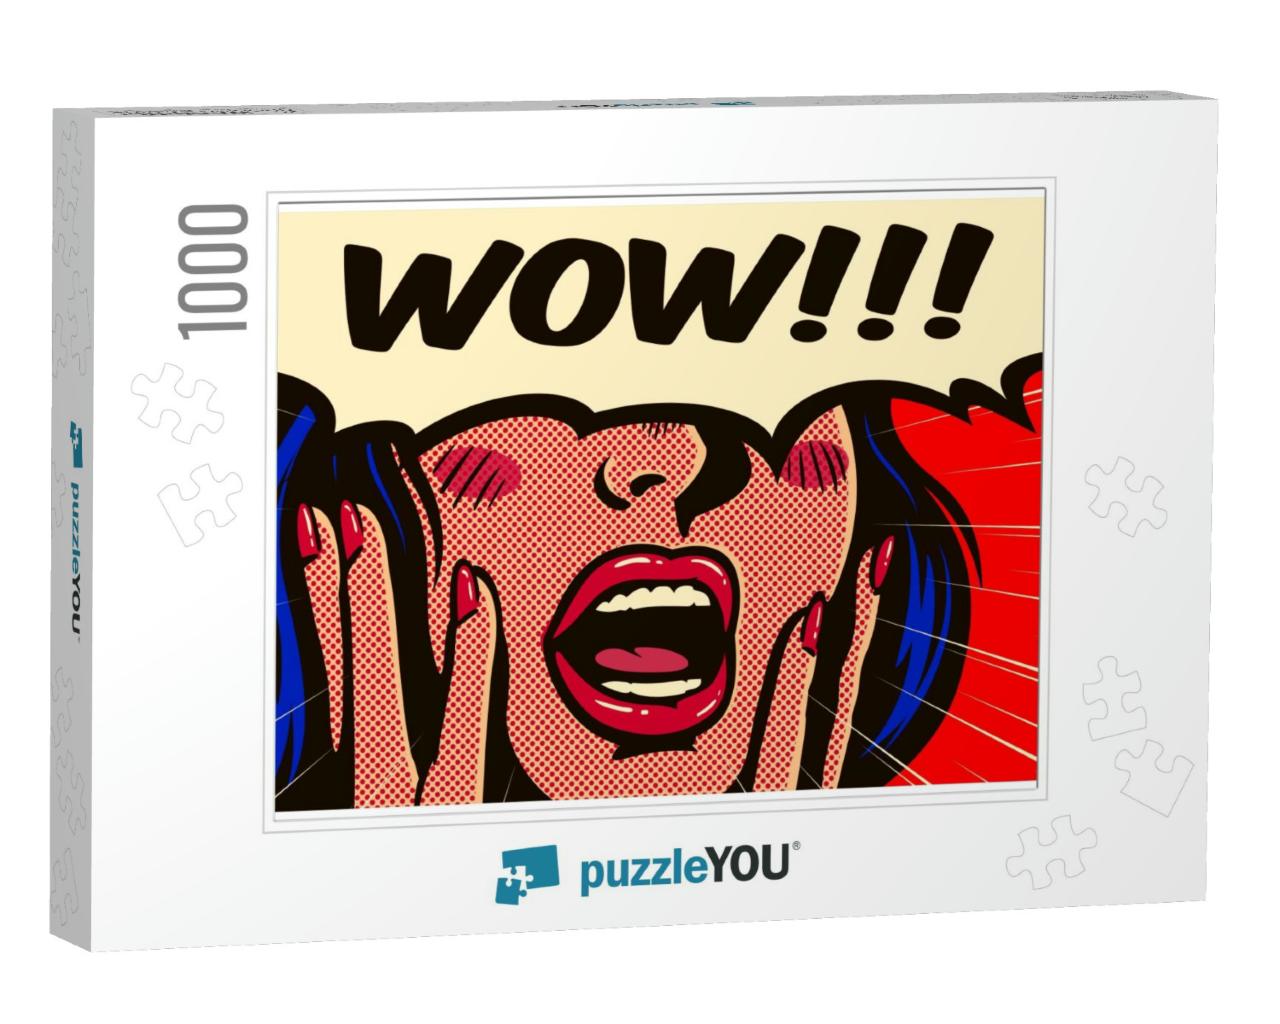 Retro Pop Art Style Surprised & Excited Comics Woman with... Jigsaw Puzzle with 1000 pieces